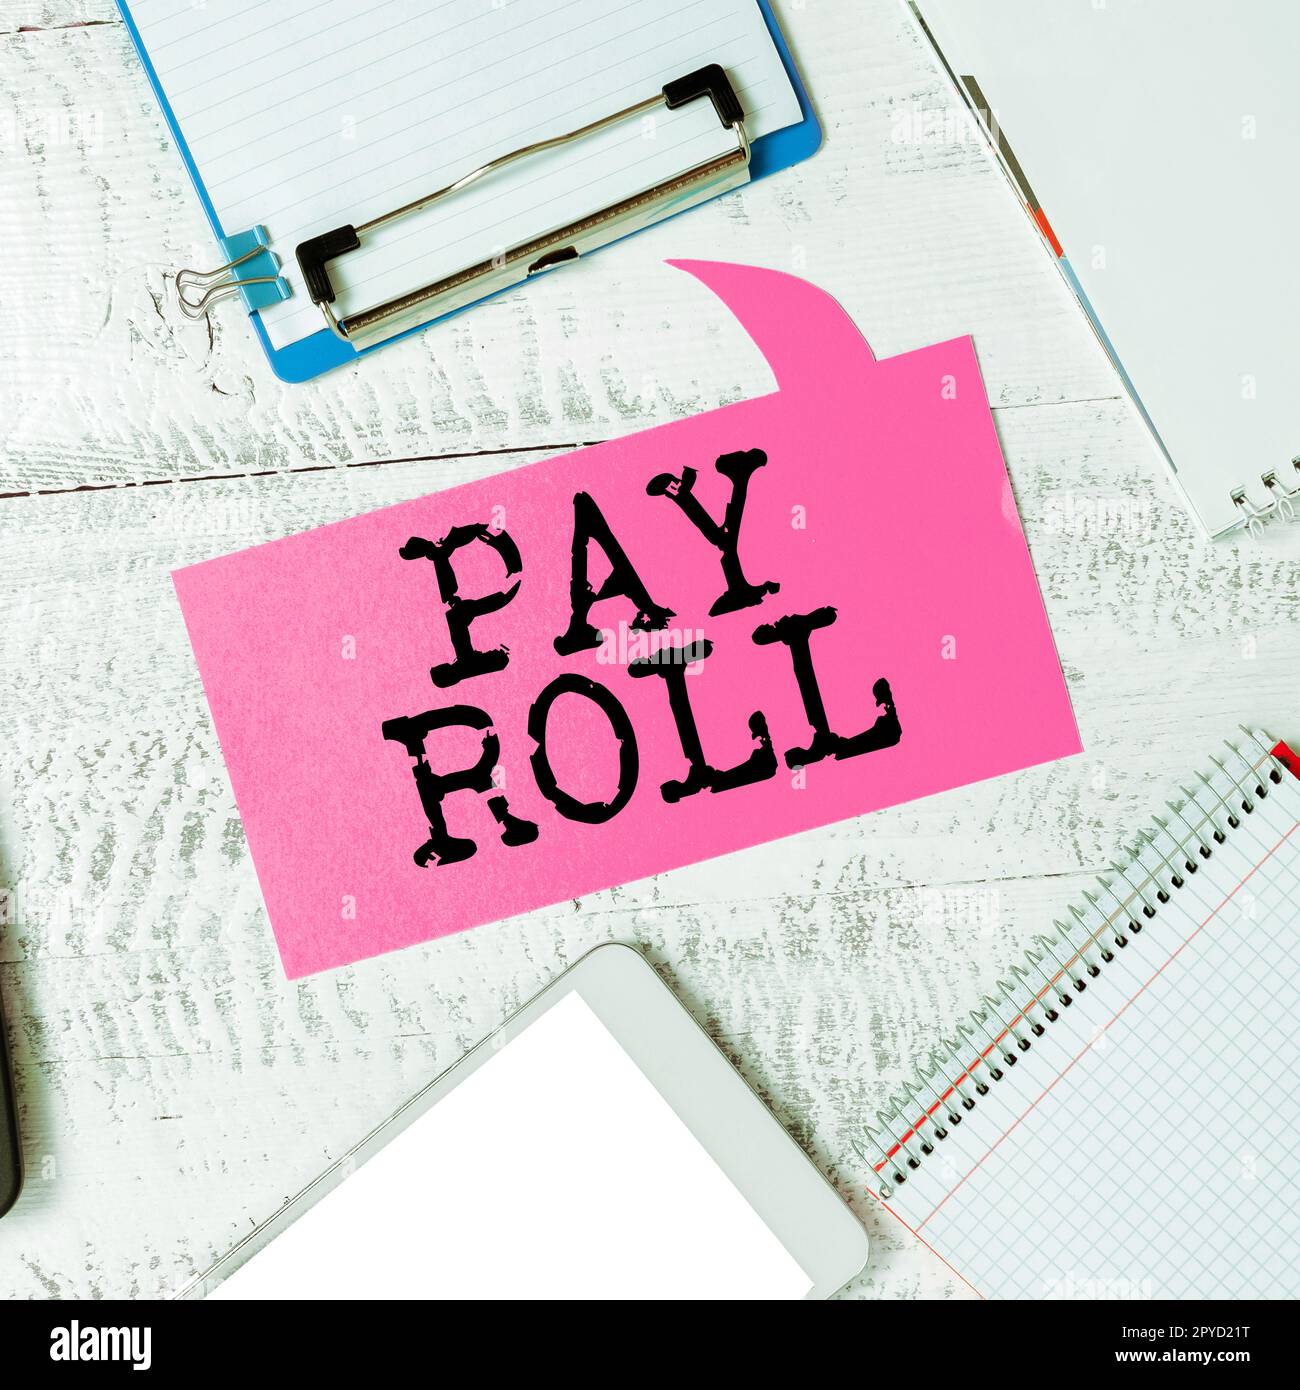 Inspiration showing sign Pay Roll. Word for Amount of wages and salaries paid by a company to its employees Stock Photo